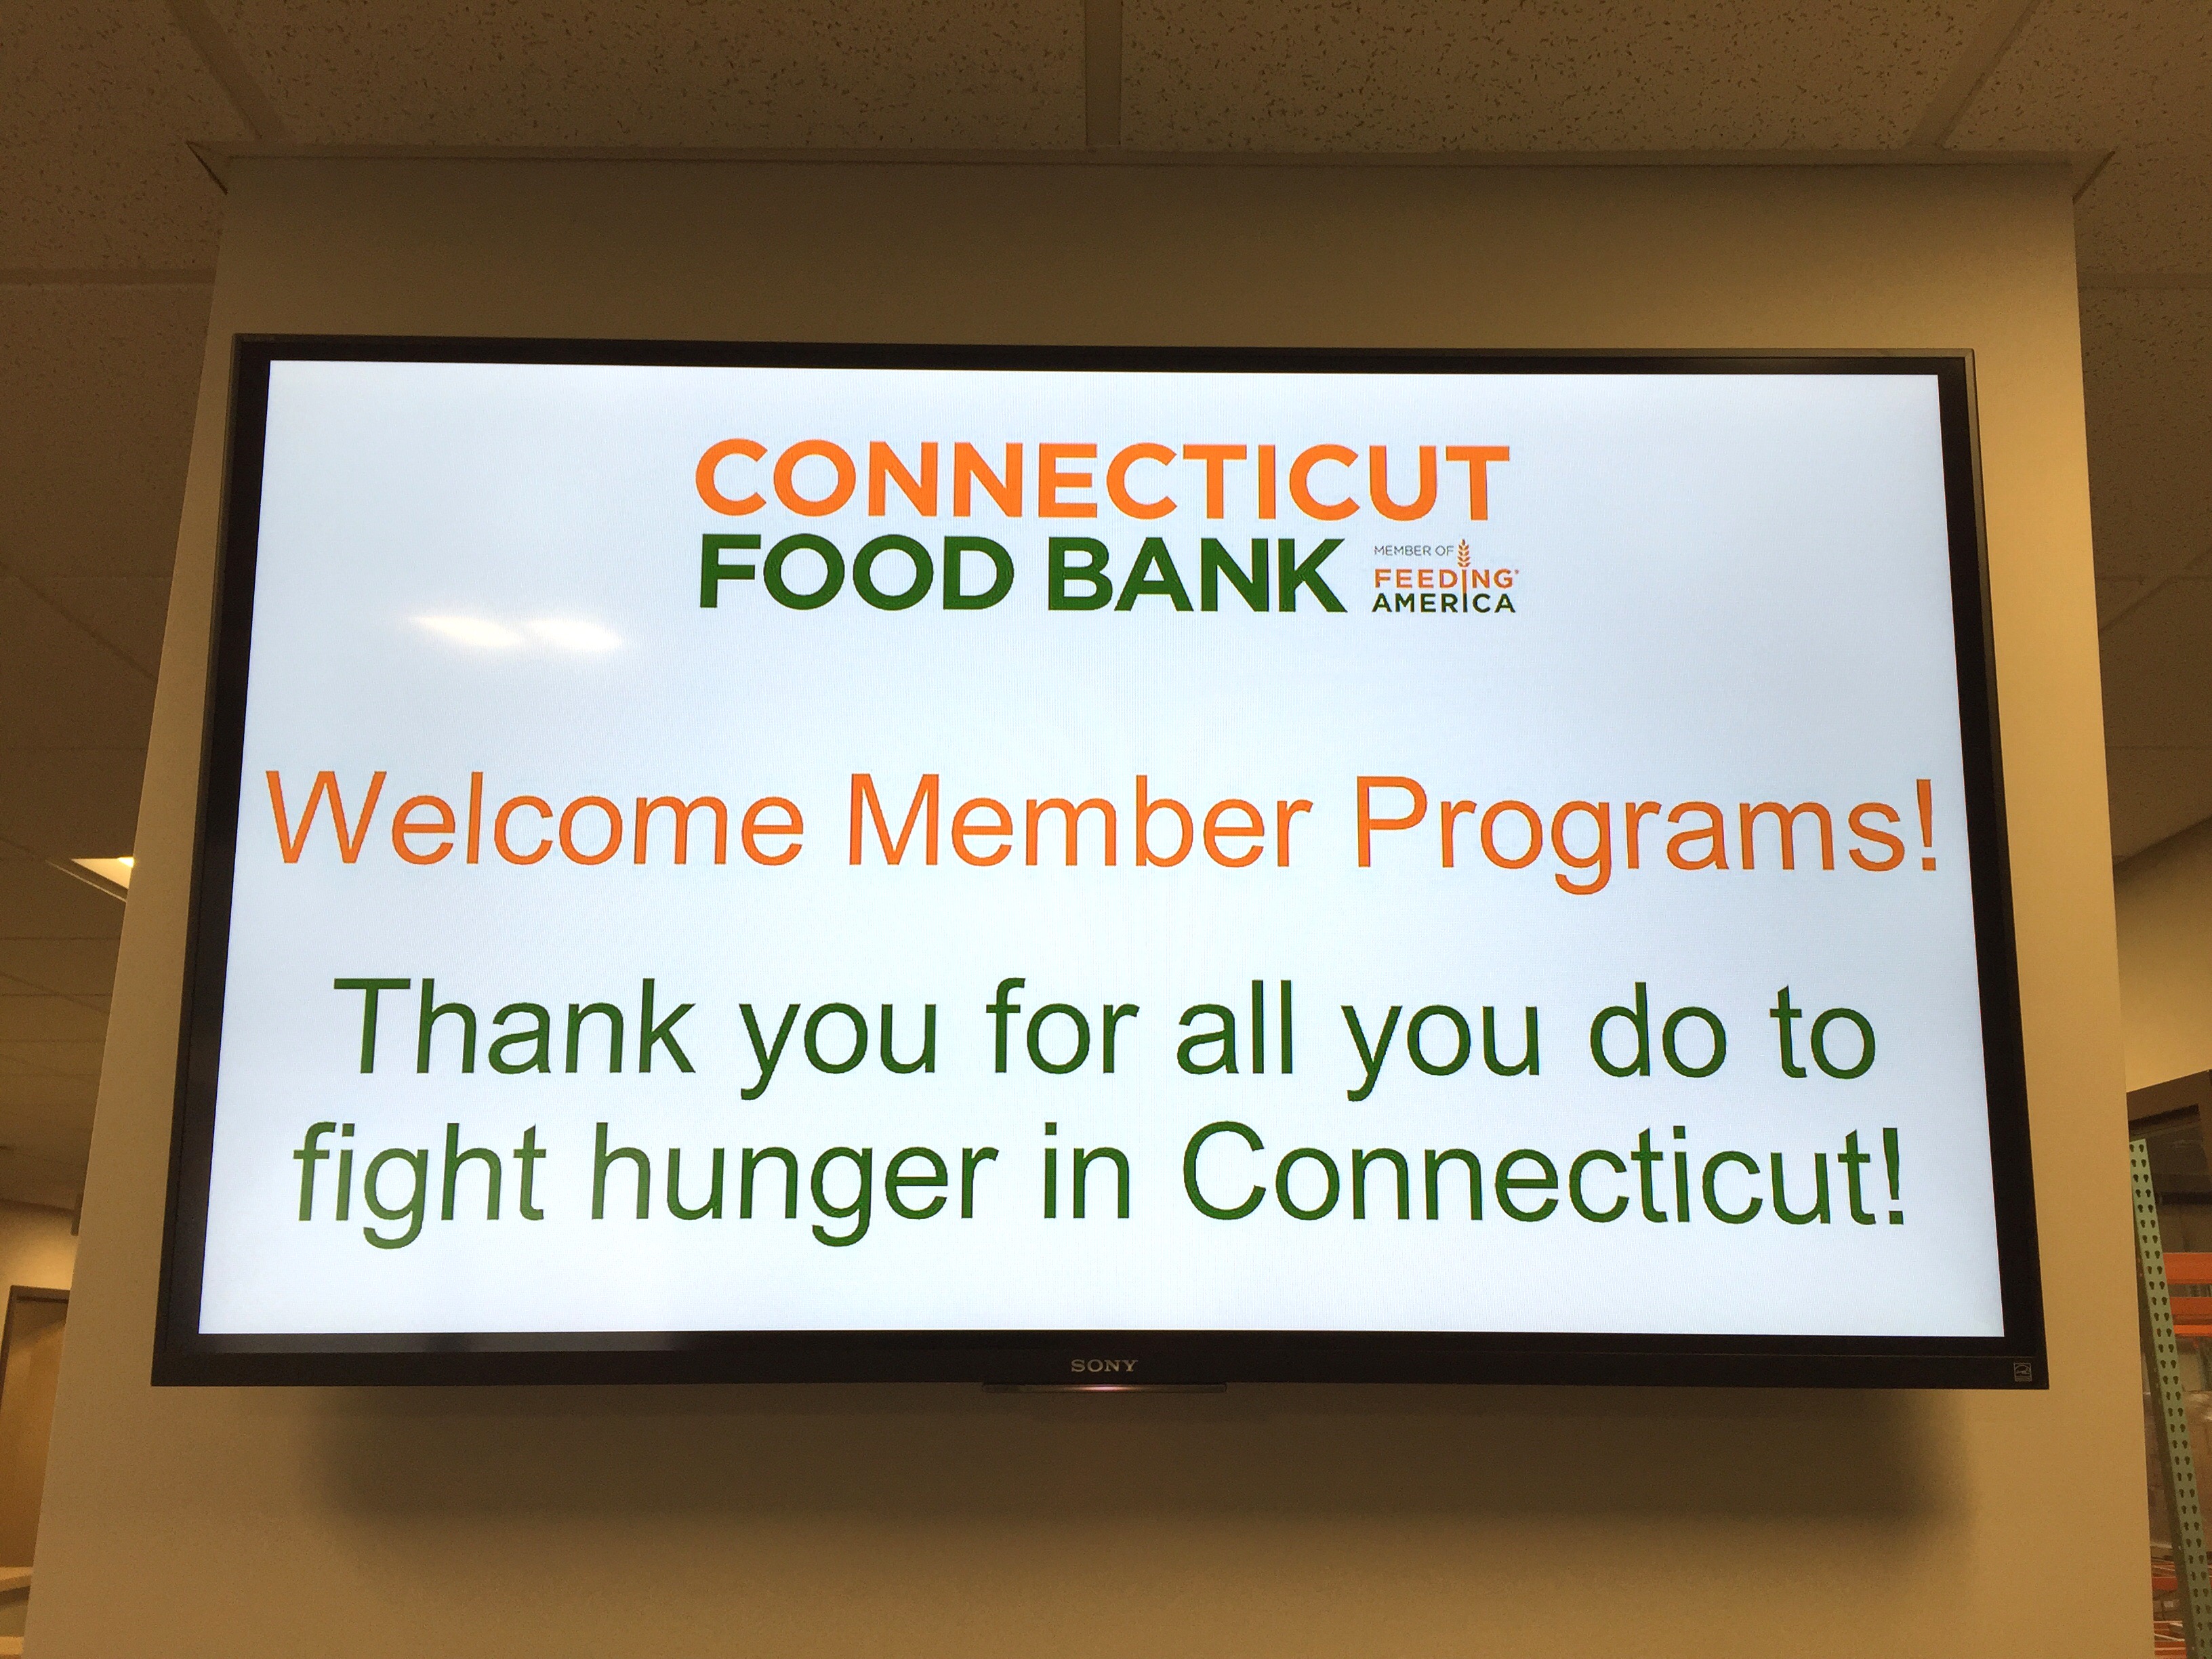 A special greeting for guests at our member programs open house November 12. These programs are the front line in the fight against hunger!